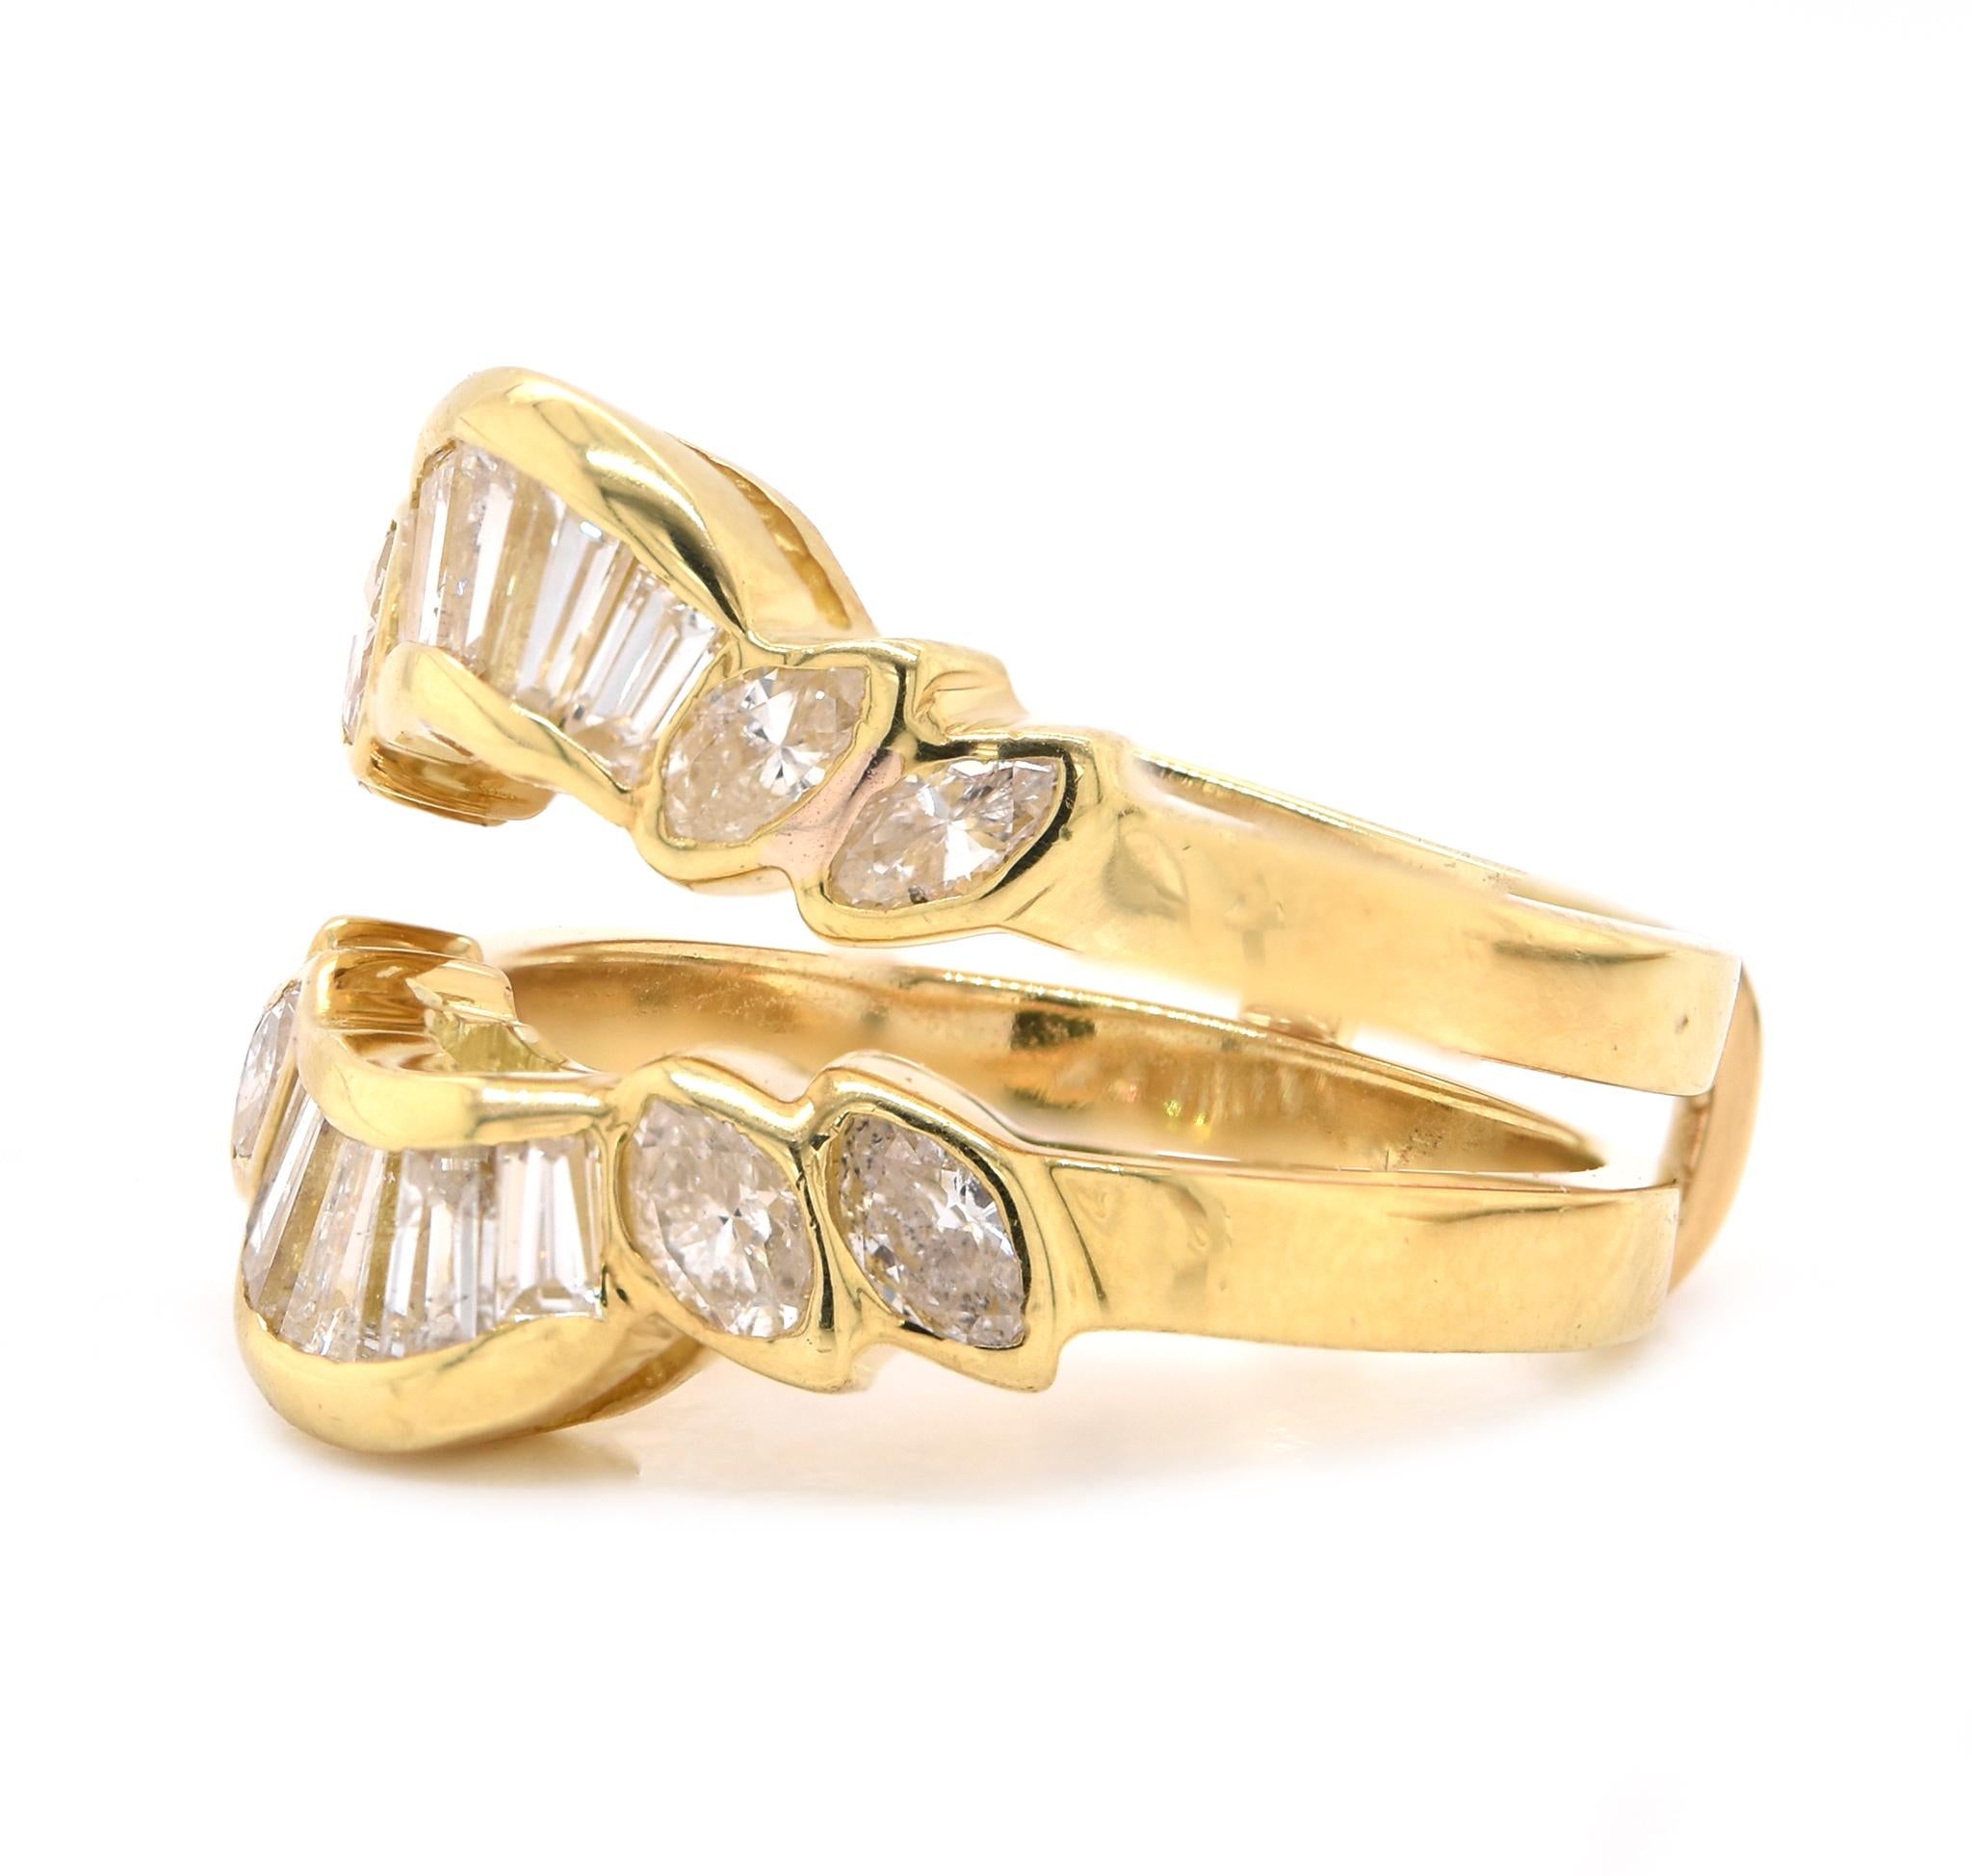 Designer: Custom
Material: 18K yellow gold
Diamonds: 16 marquise and baguette cut = 1.28cttw
Color: J
Clarity: SI1
Size: 6.5
Dimensions: ring measures 15mm in width
Weight: 8.49 grams